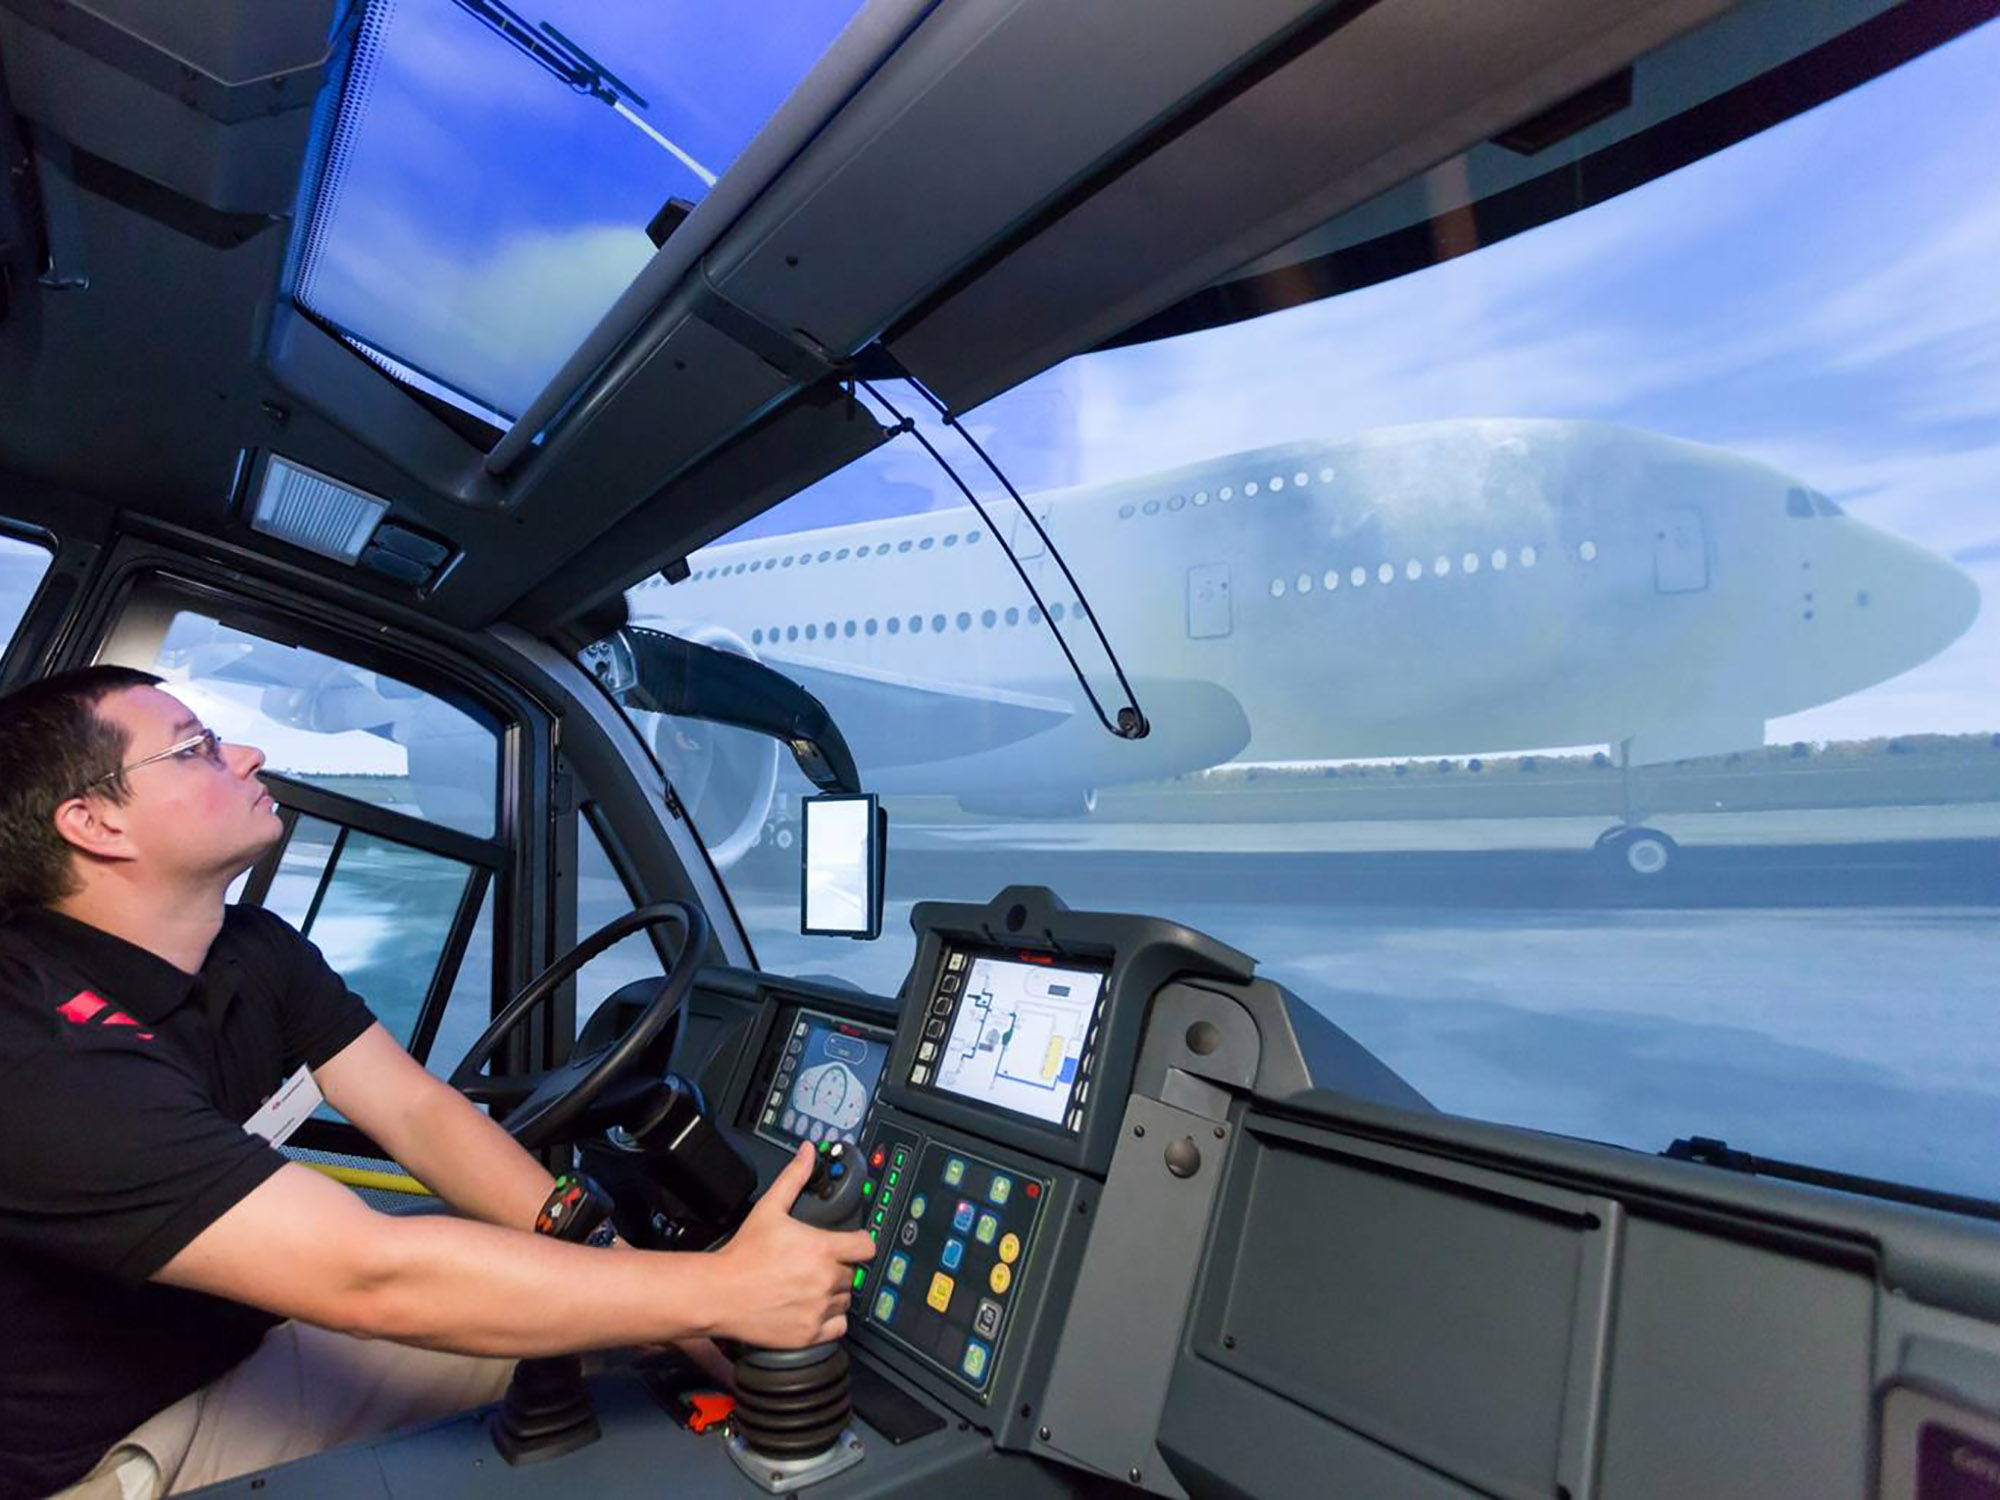 A trainee is operating the HRET to extinguish an A-380 interior fire from inside a full cabin ARFF simulator.